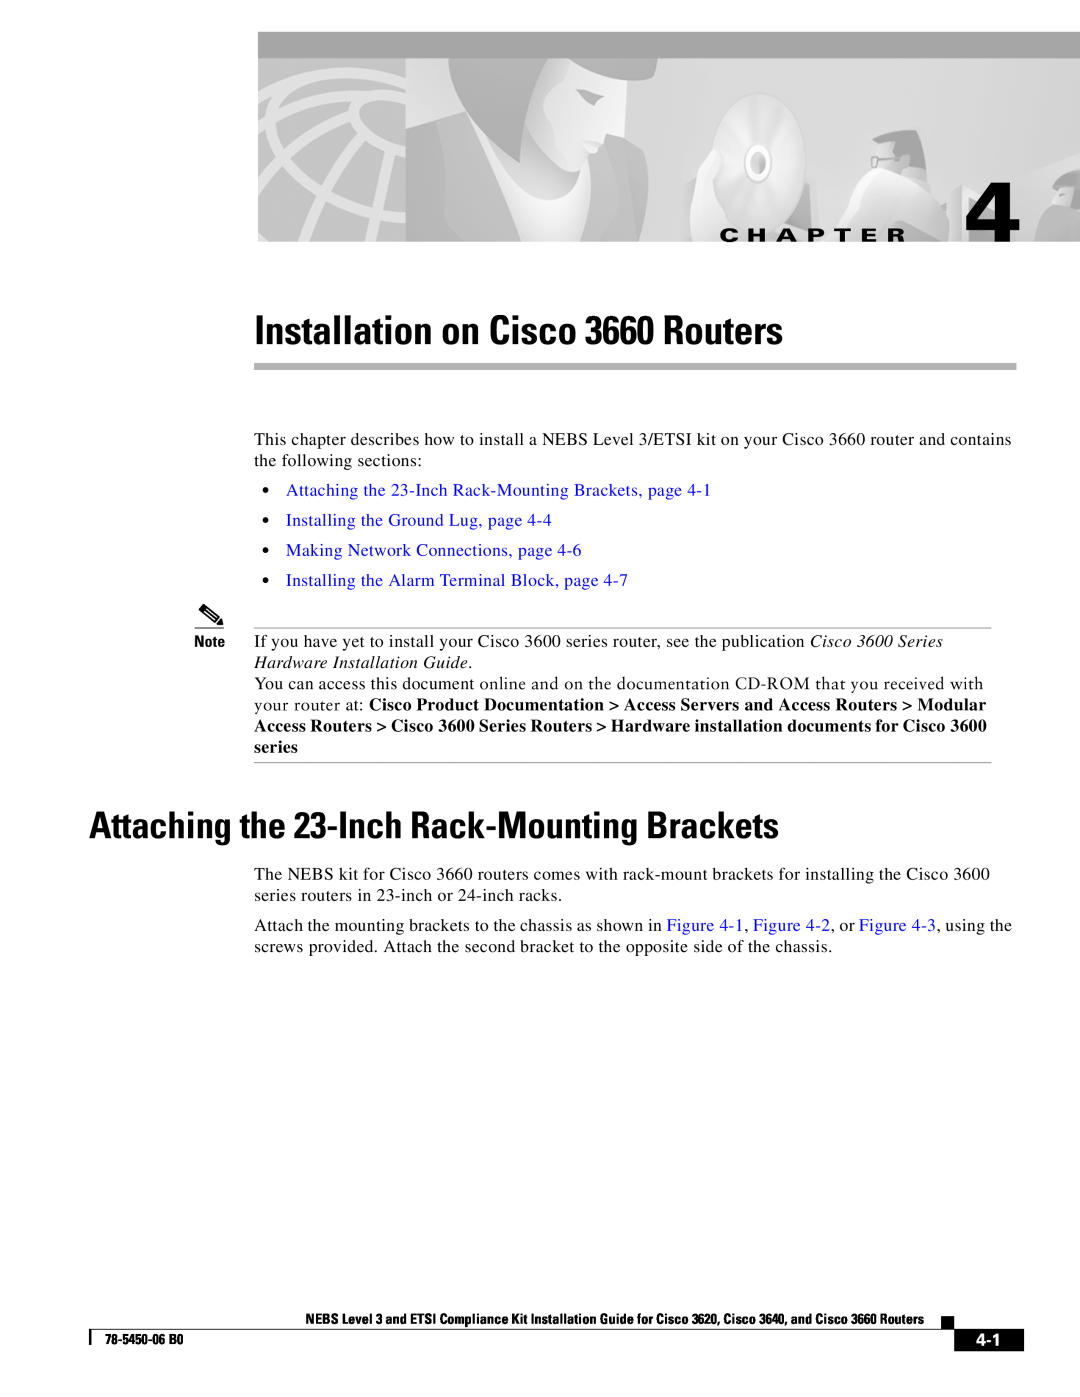 Cisco Systems manual Attaching the 23-Inch Rack-Mounting Brackets, Installation on Cisco 3660 Routers, C H A P T E R 